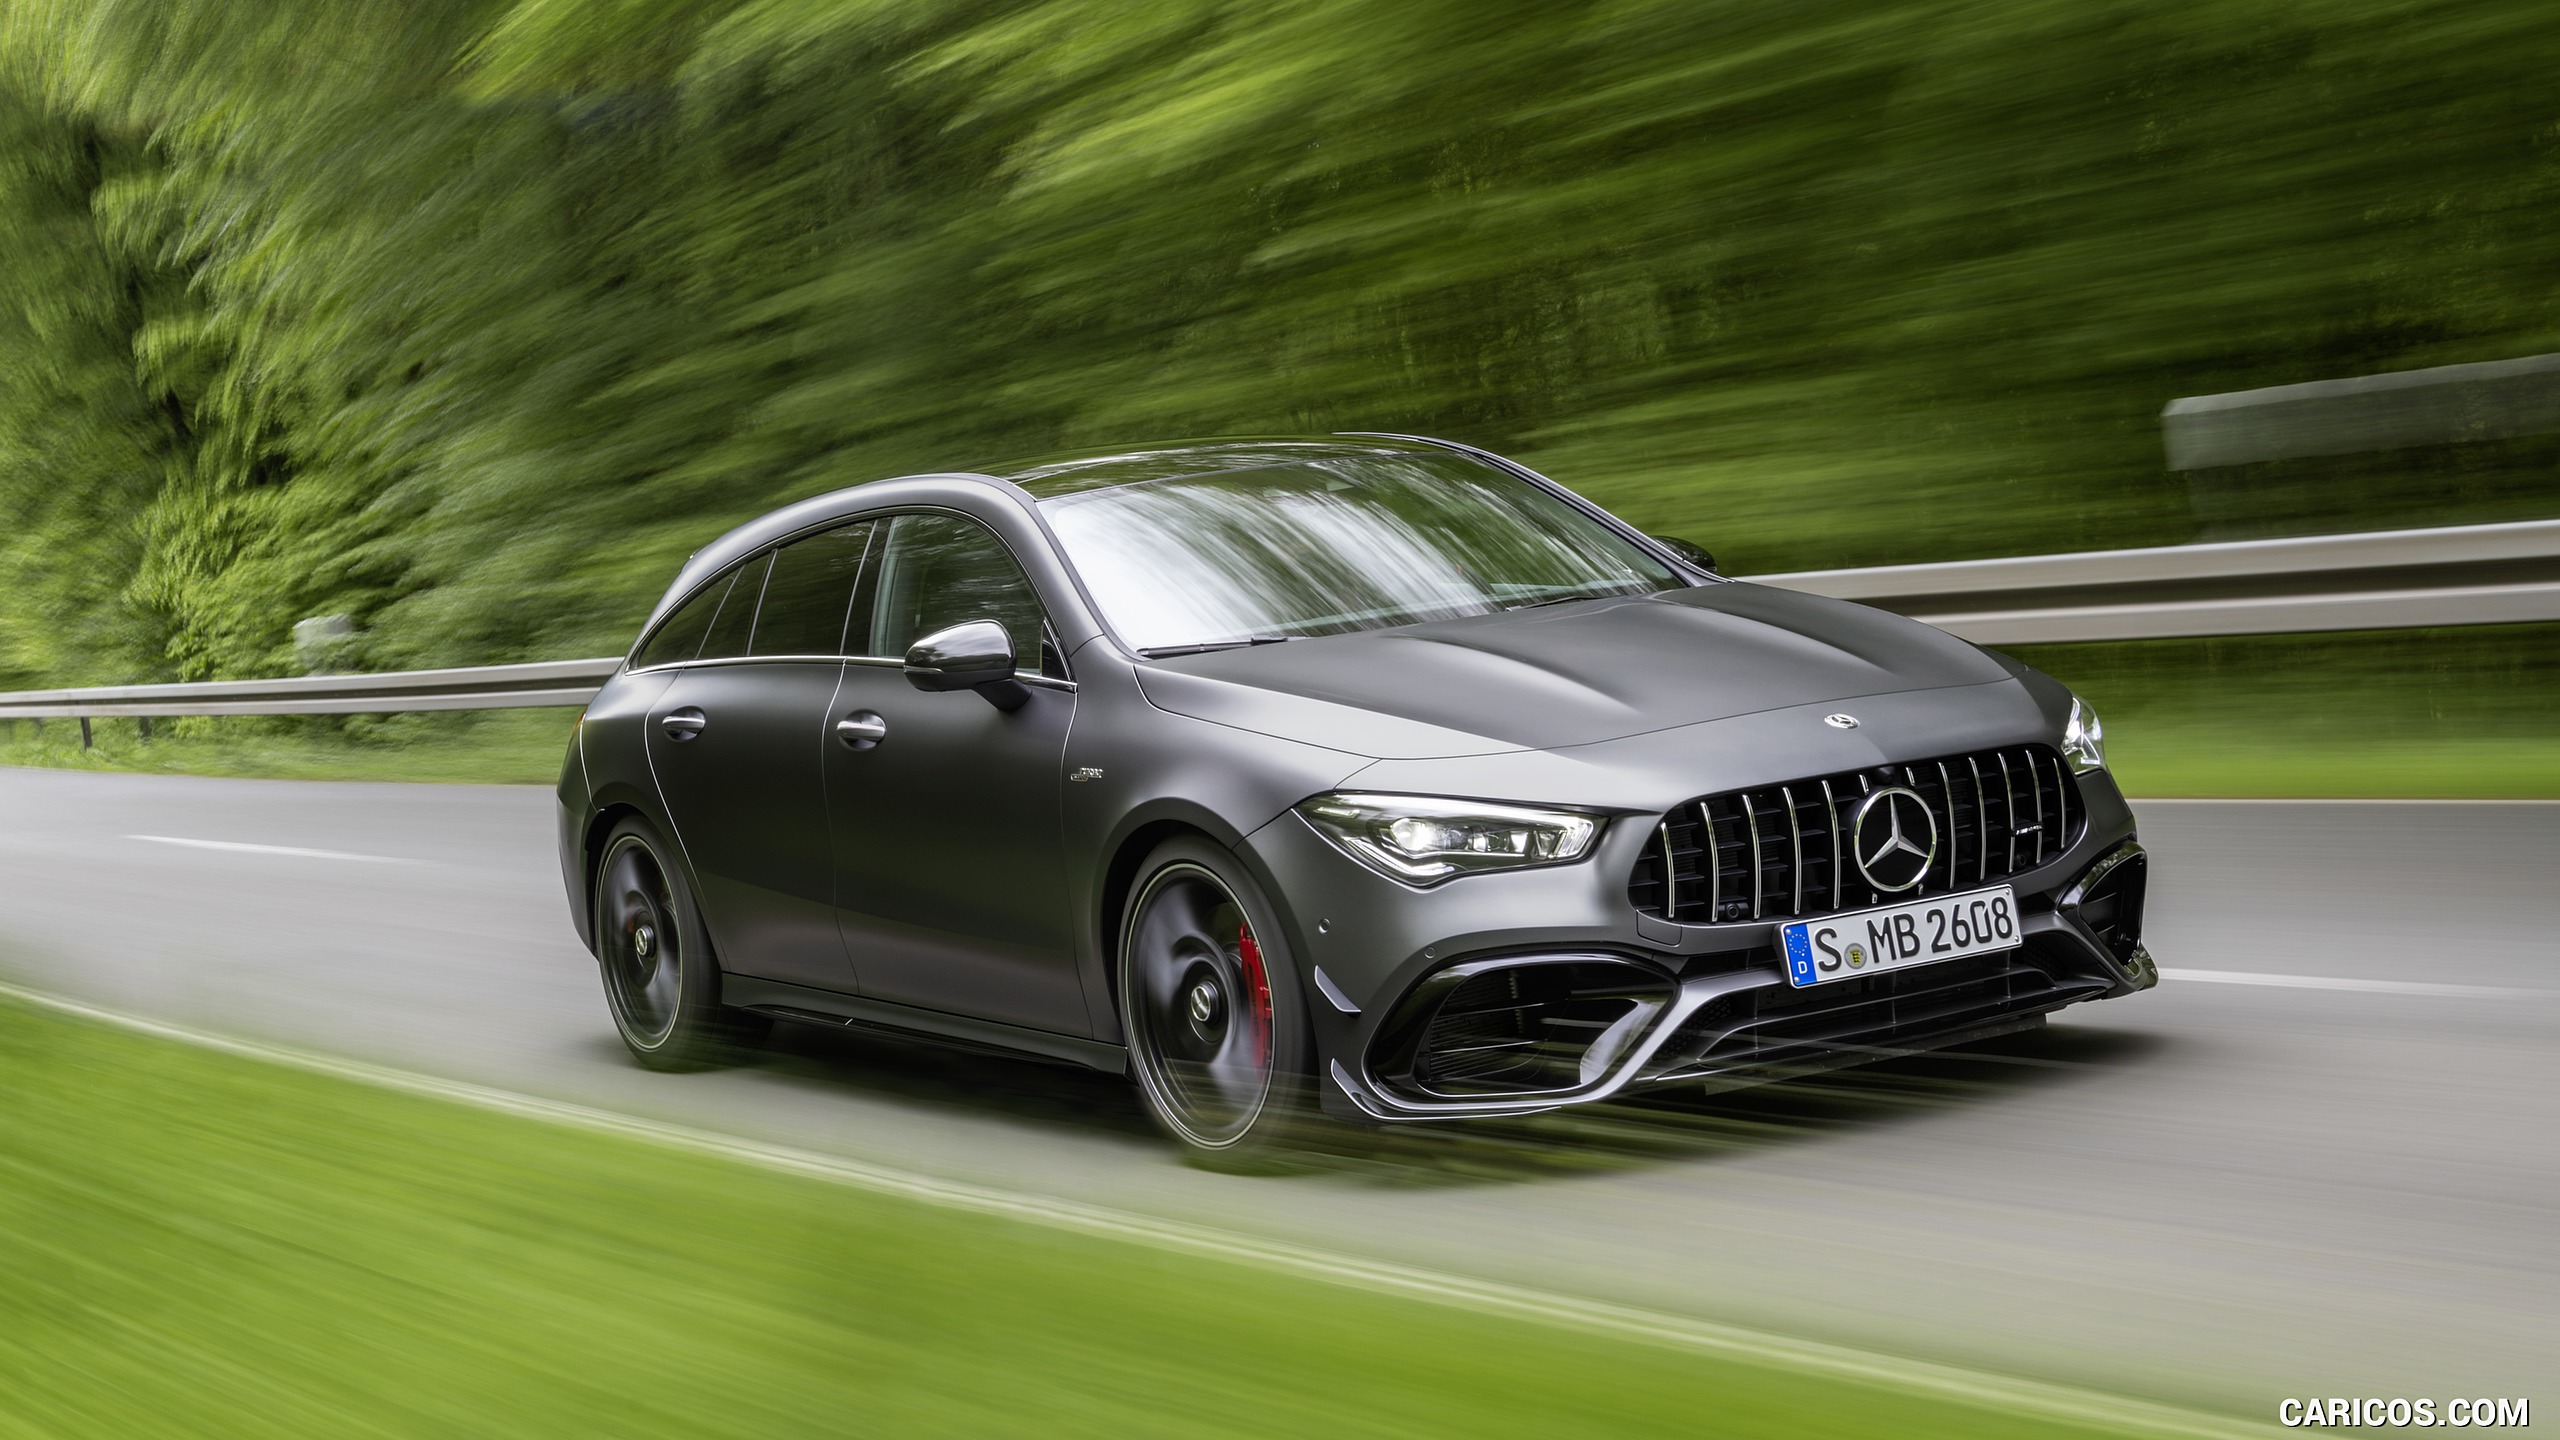 2020 Mercedes-AMG CLA 45 S 4MATIC+ Shooting Brake - Front Three-Quarter, #10 of 35